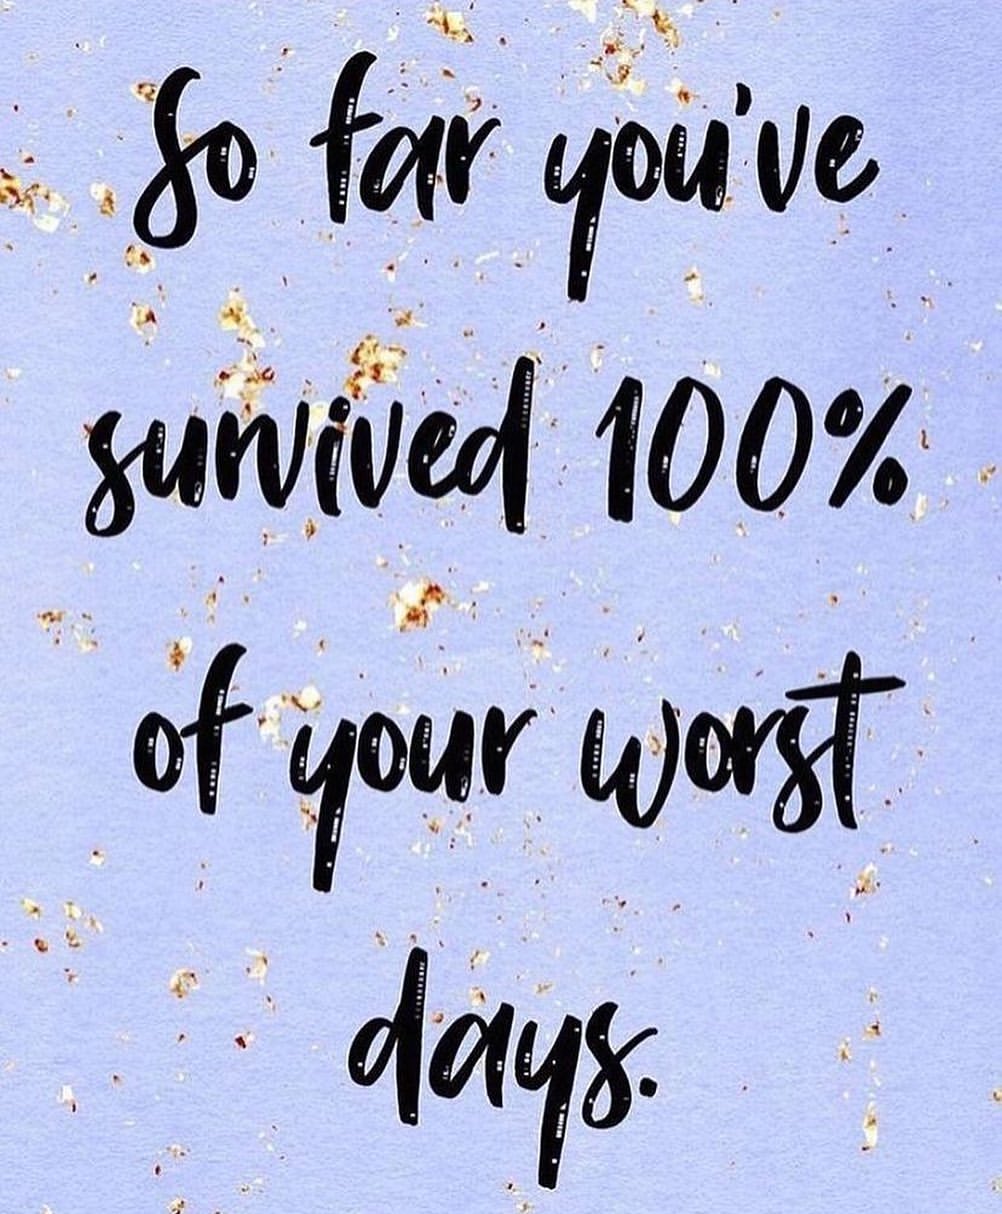 So far you've survived 100% of your worst days.